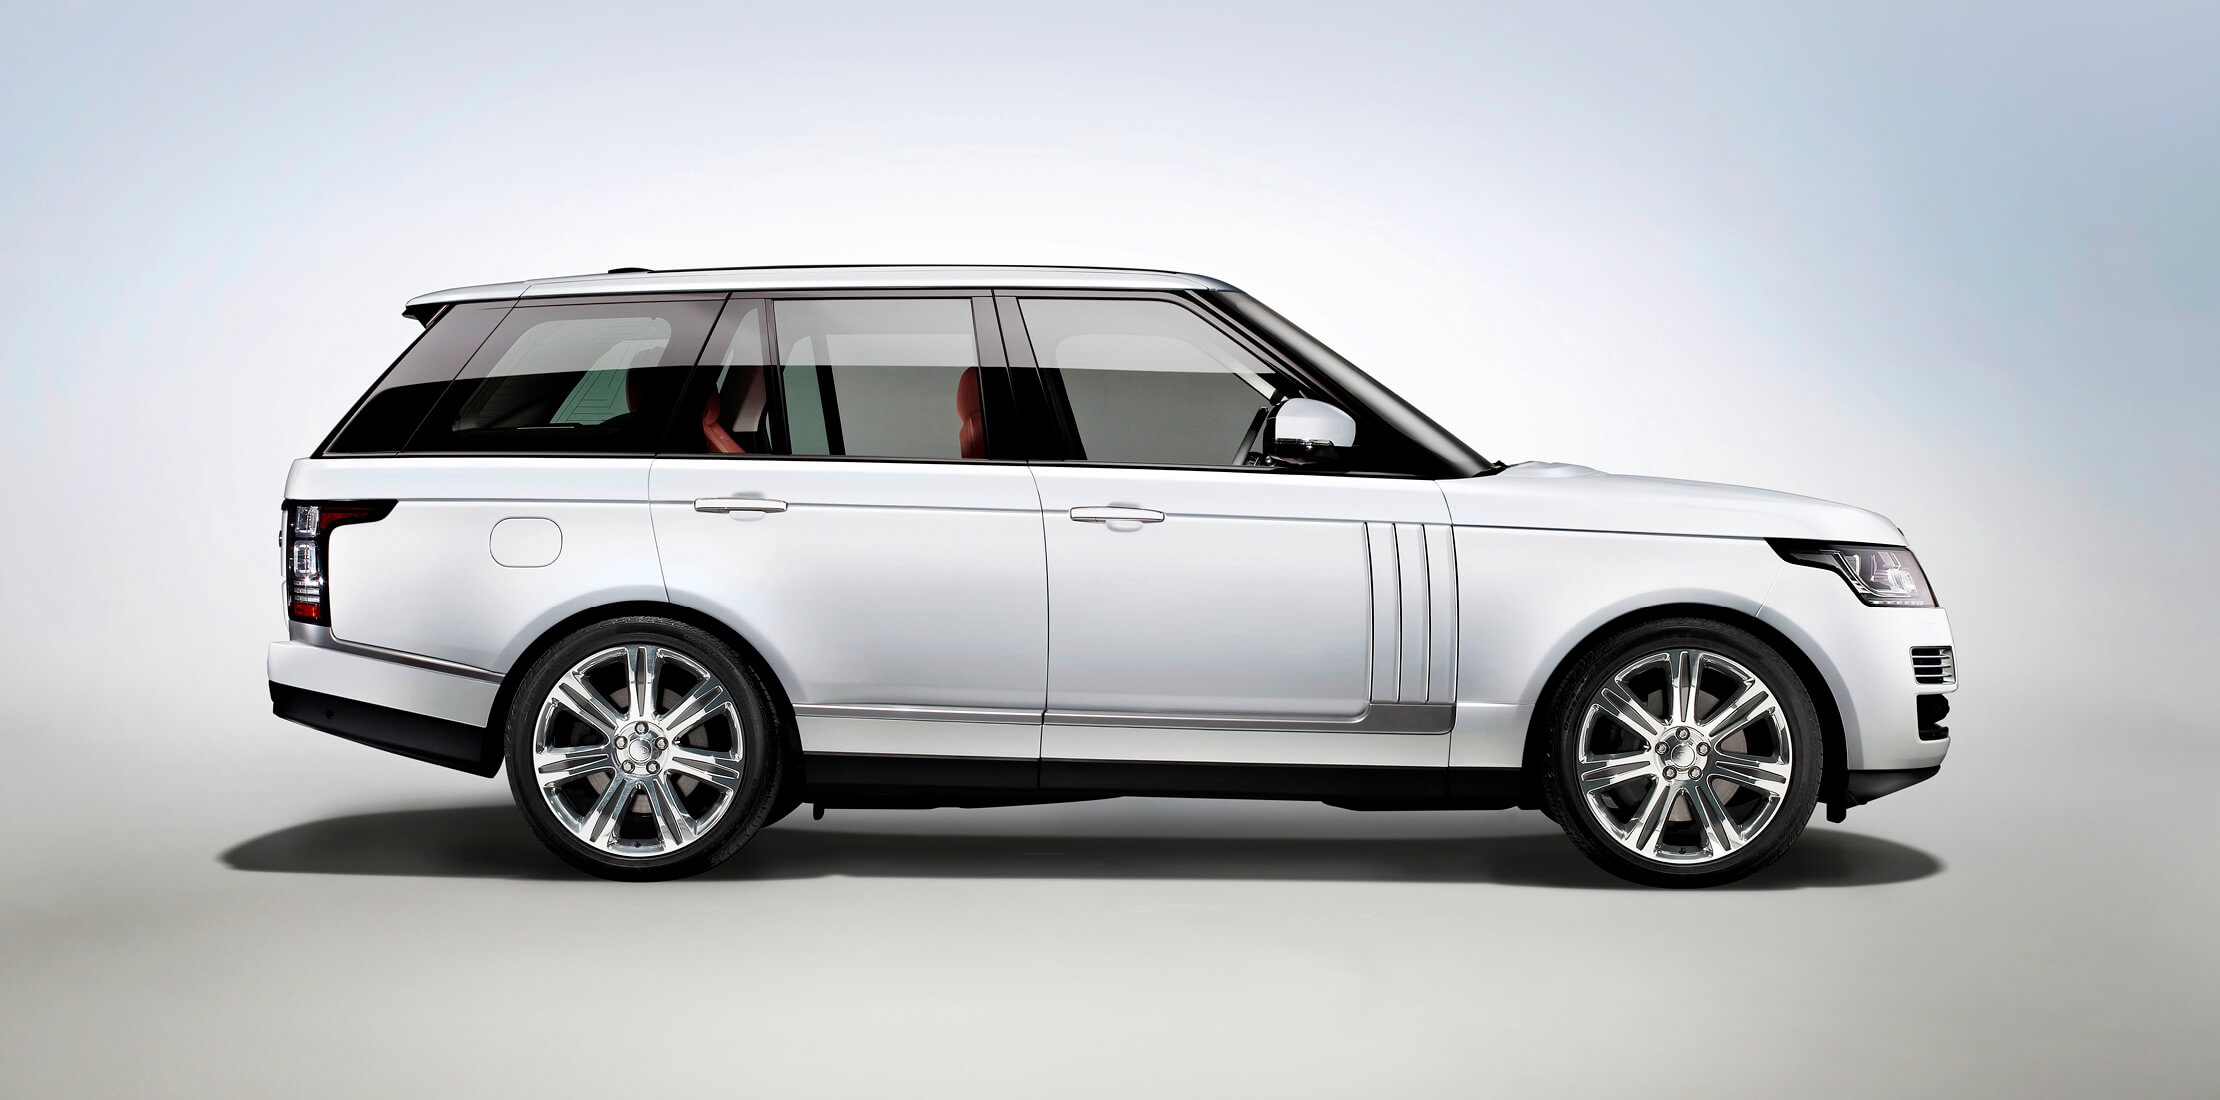 Profile shot of a white Land Rover Range Rover, with red leather interior on a blue and grey background